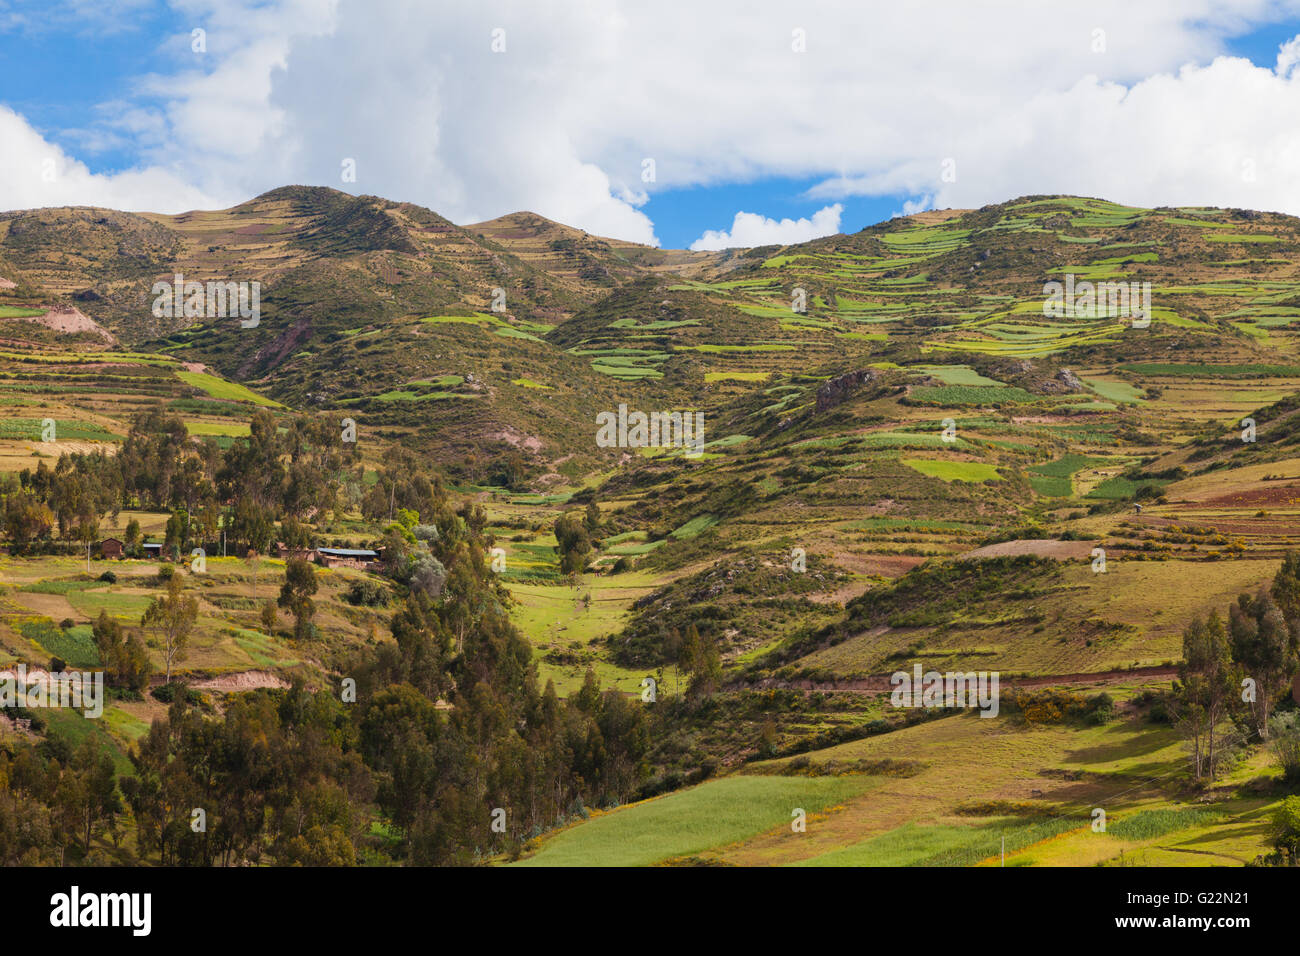 Cultivated fields above the Andean village of Misminay, Peru Stock Photo